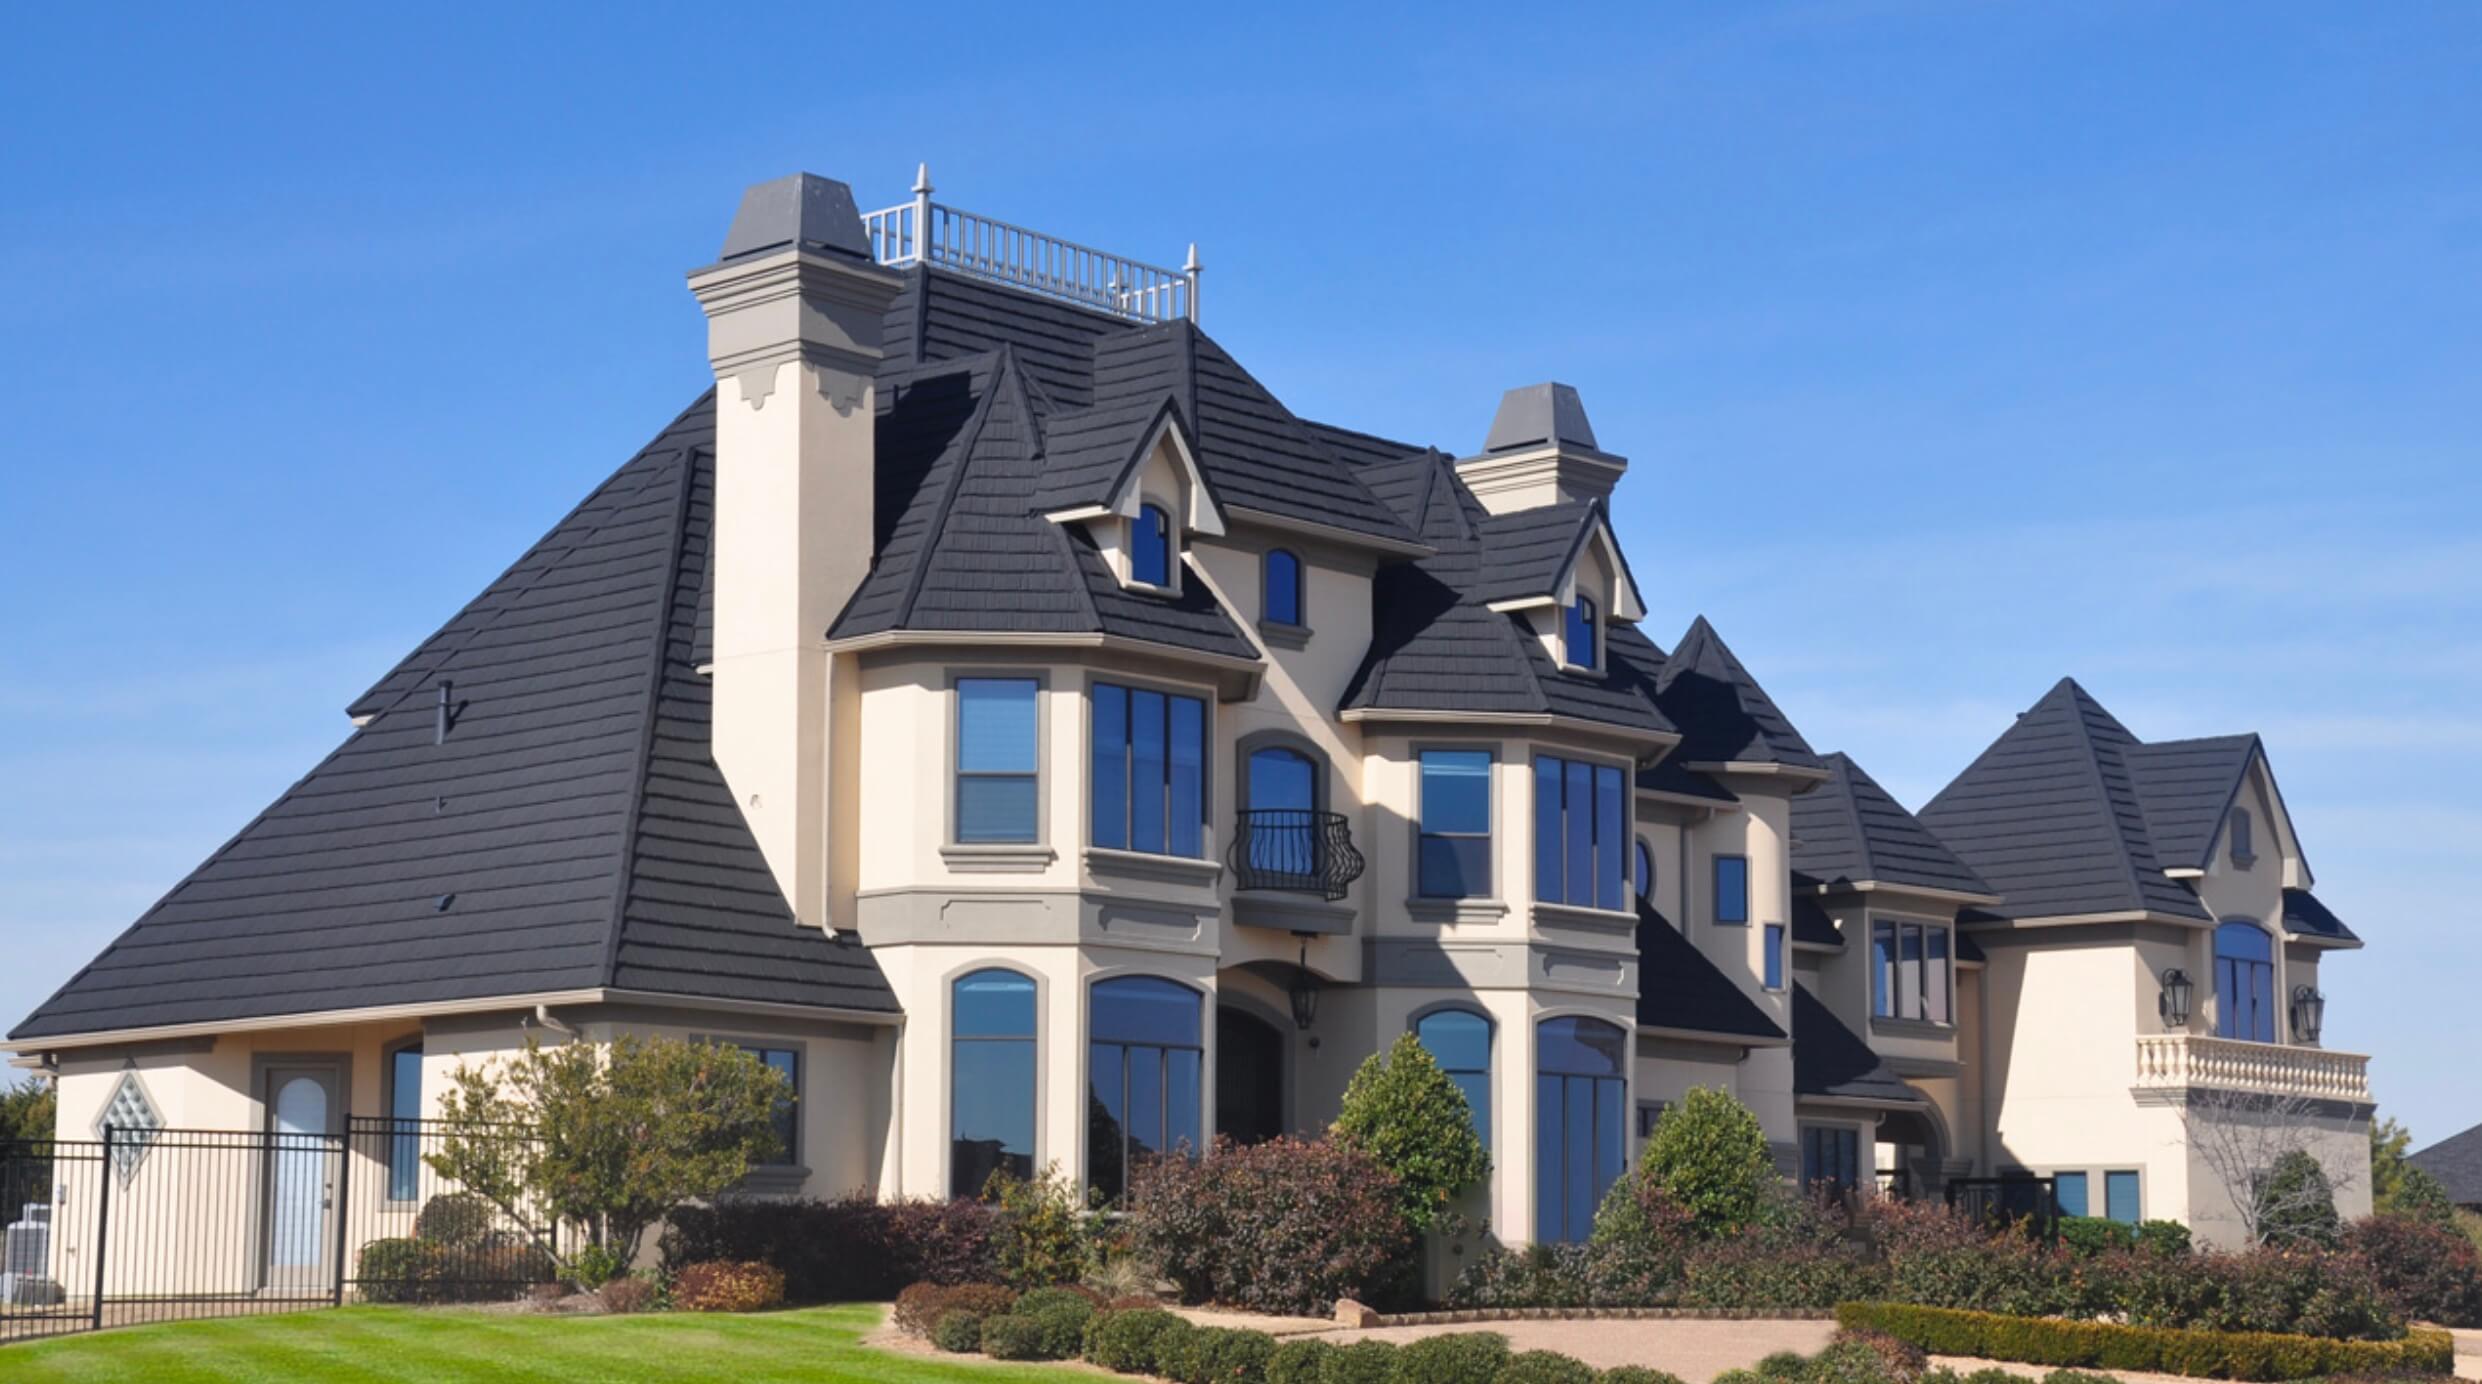 large beautiful mansion with metal shingles on steep roof